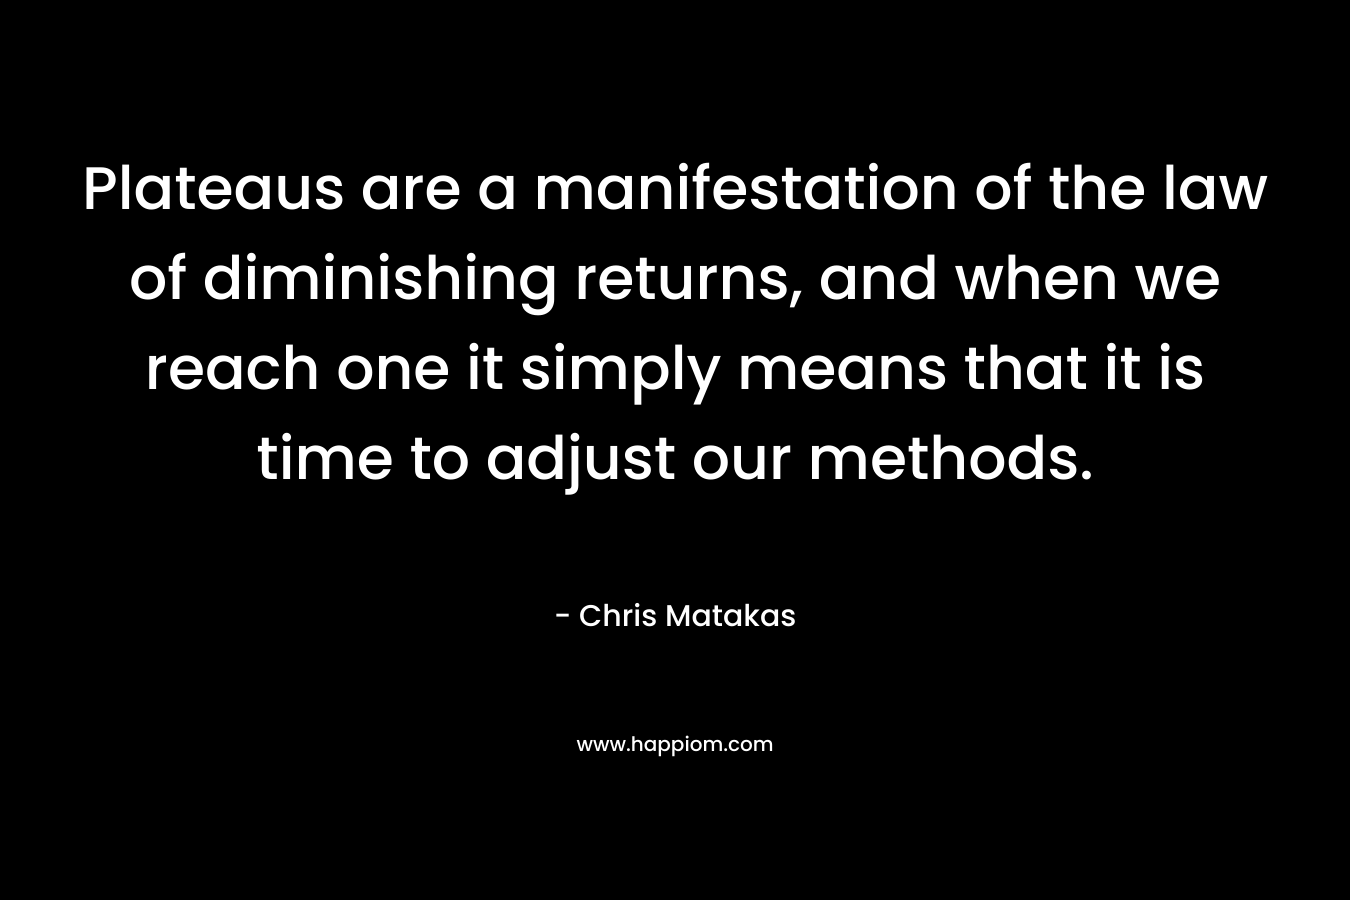 Plateaus are a manifestation of the law of diminishing returns, and when we reach one it simply means that it is time to adjust our methods. – Chris Matakas